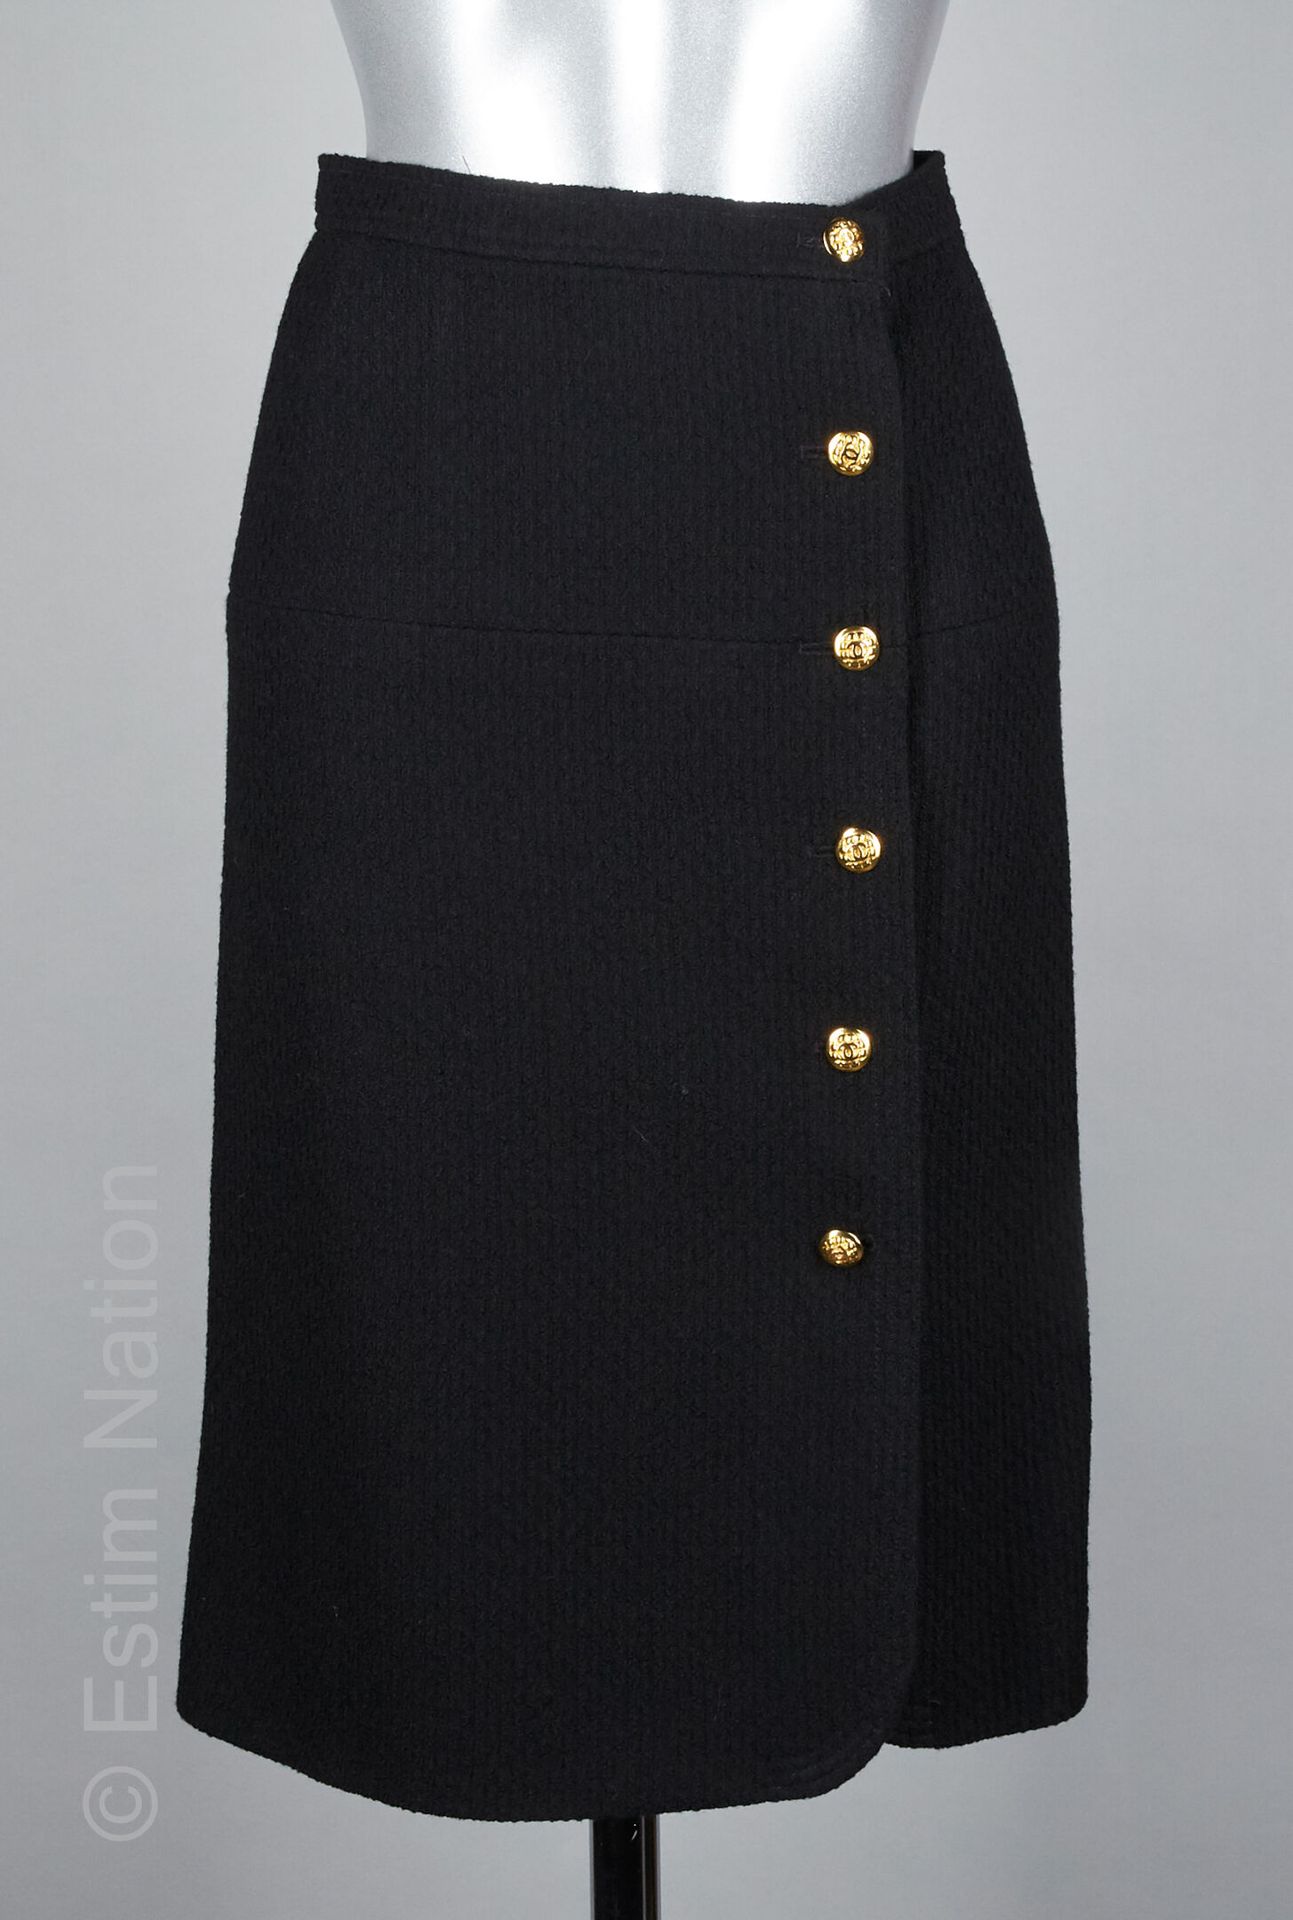 Skirt in black wool tweed with golden metal buttons sign…